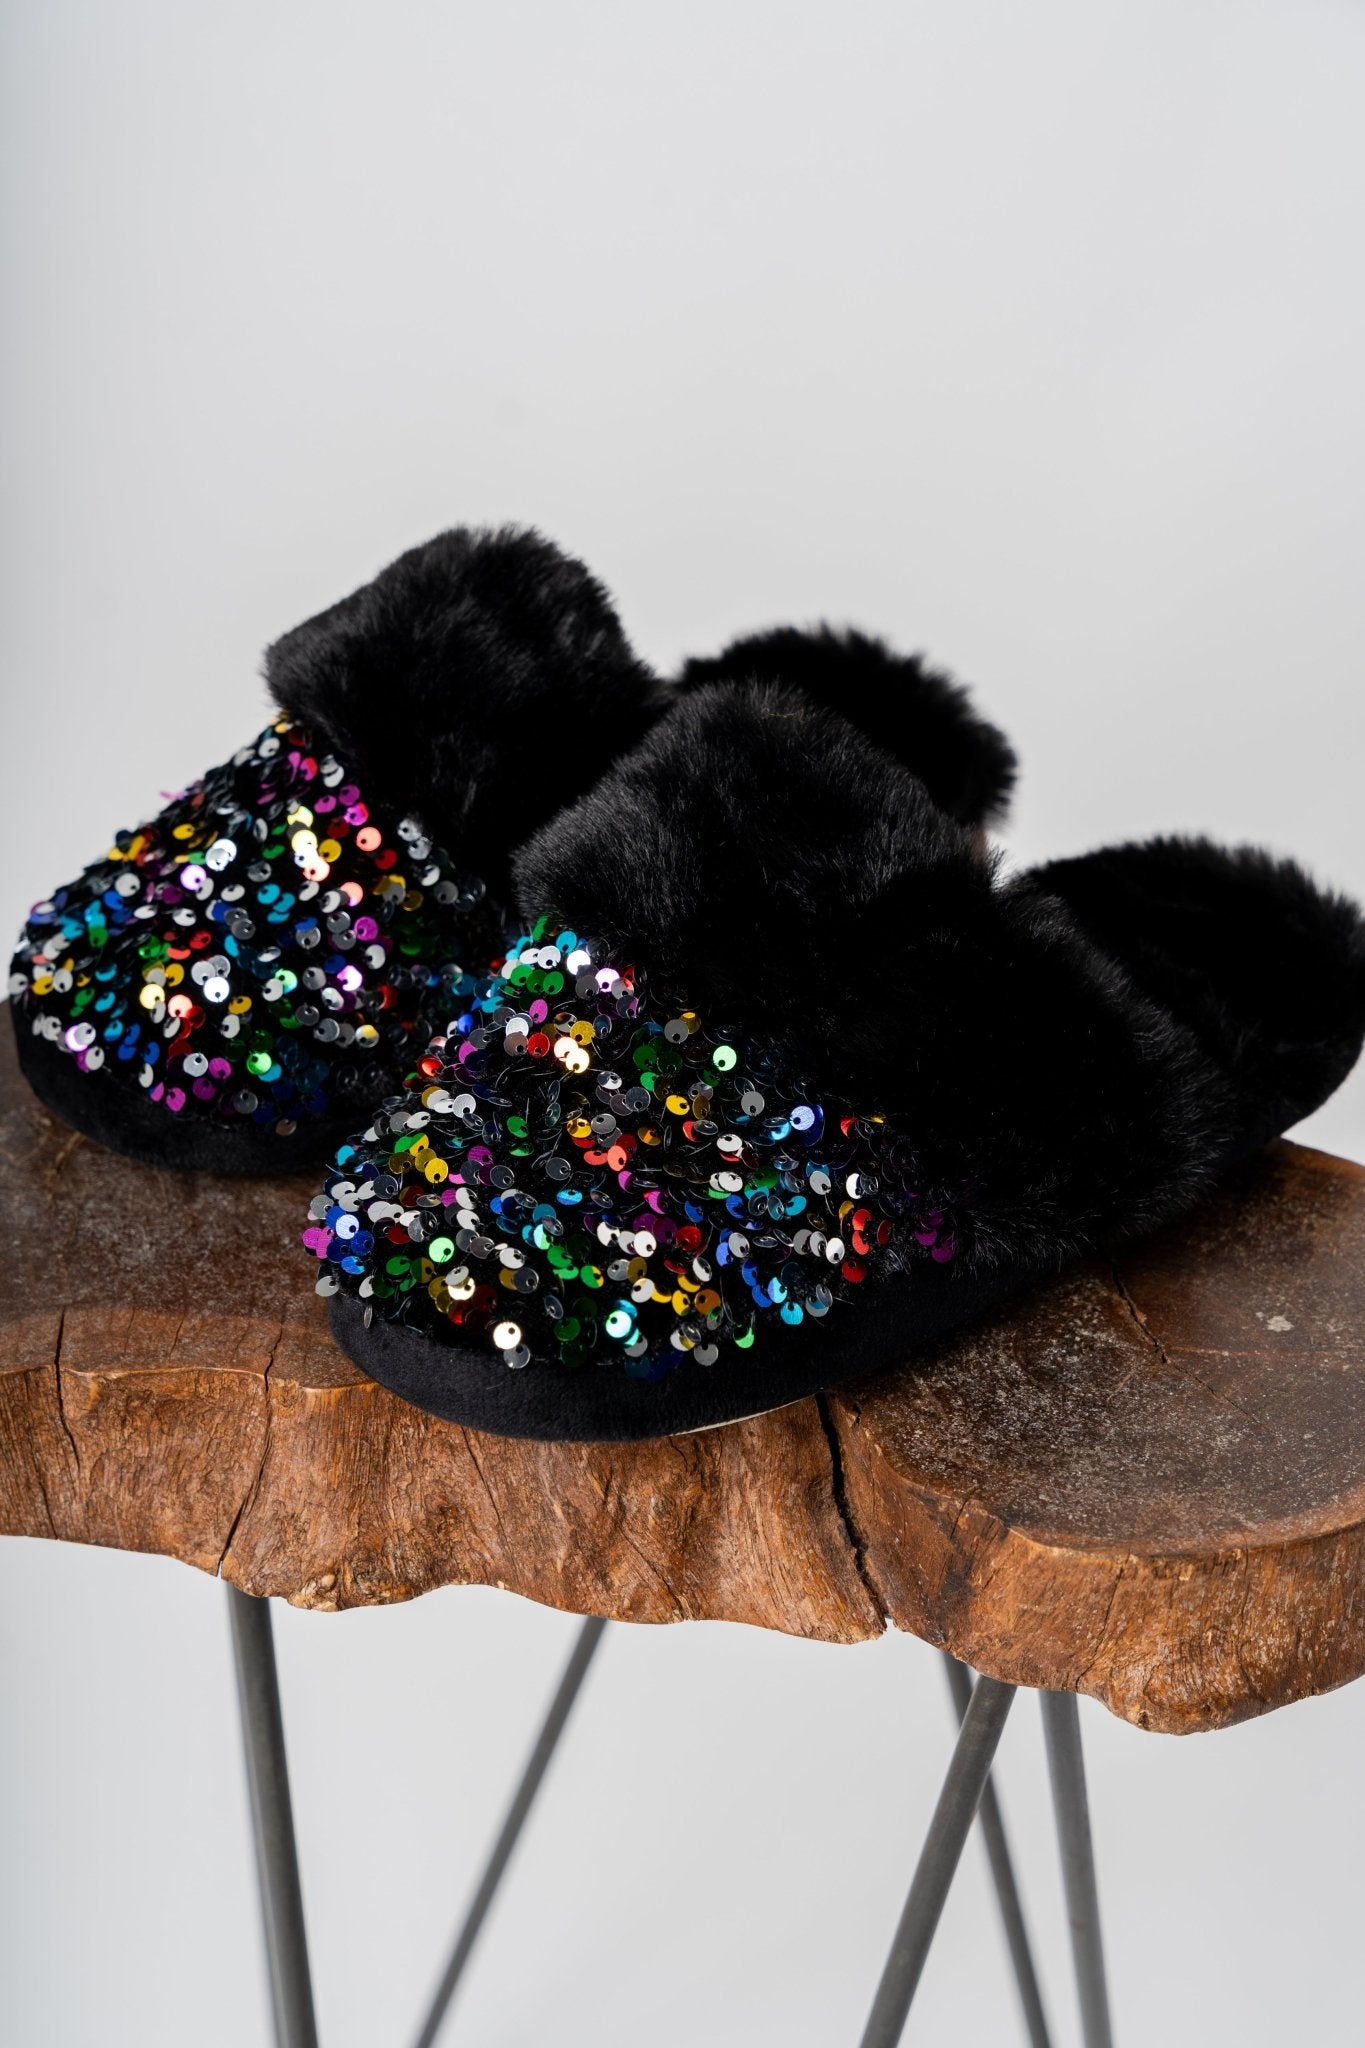 Fiesta sequin slippers black - Exclusive Collection of Holiday Inspired T-Shirts and Hoodies at Lush Fashion Lounge Boutique in Oklahoma City